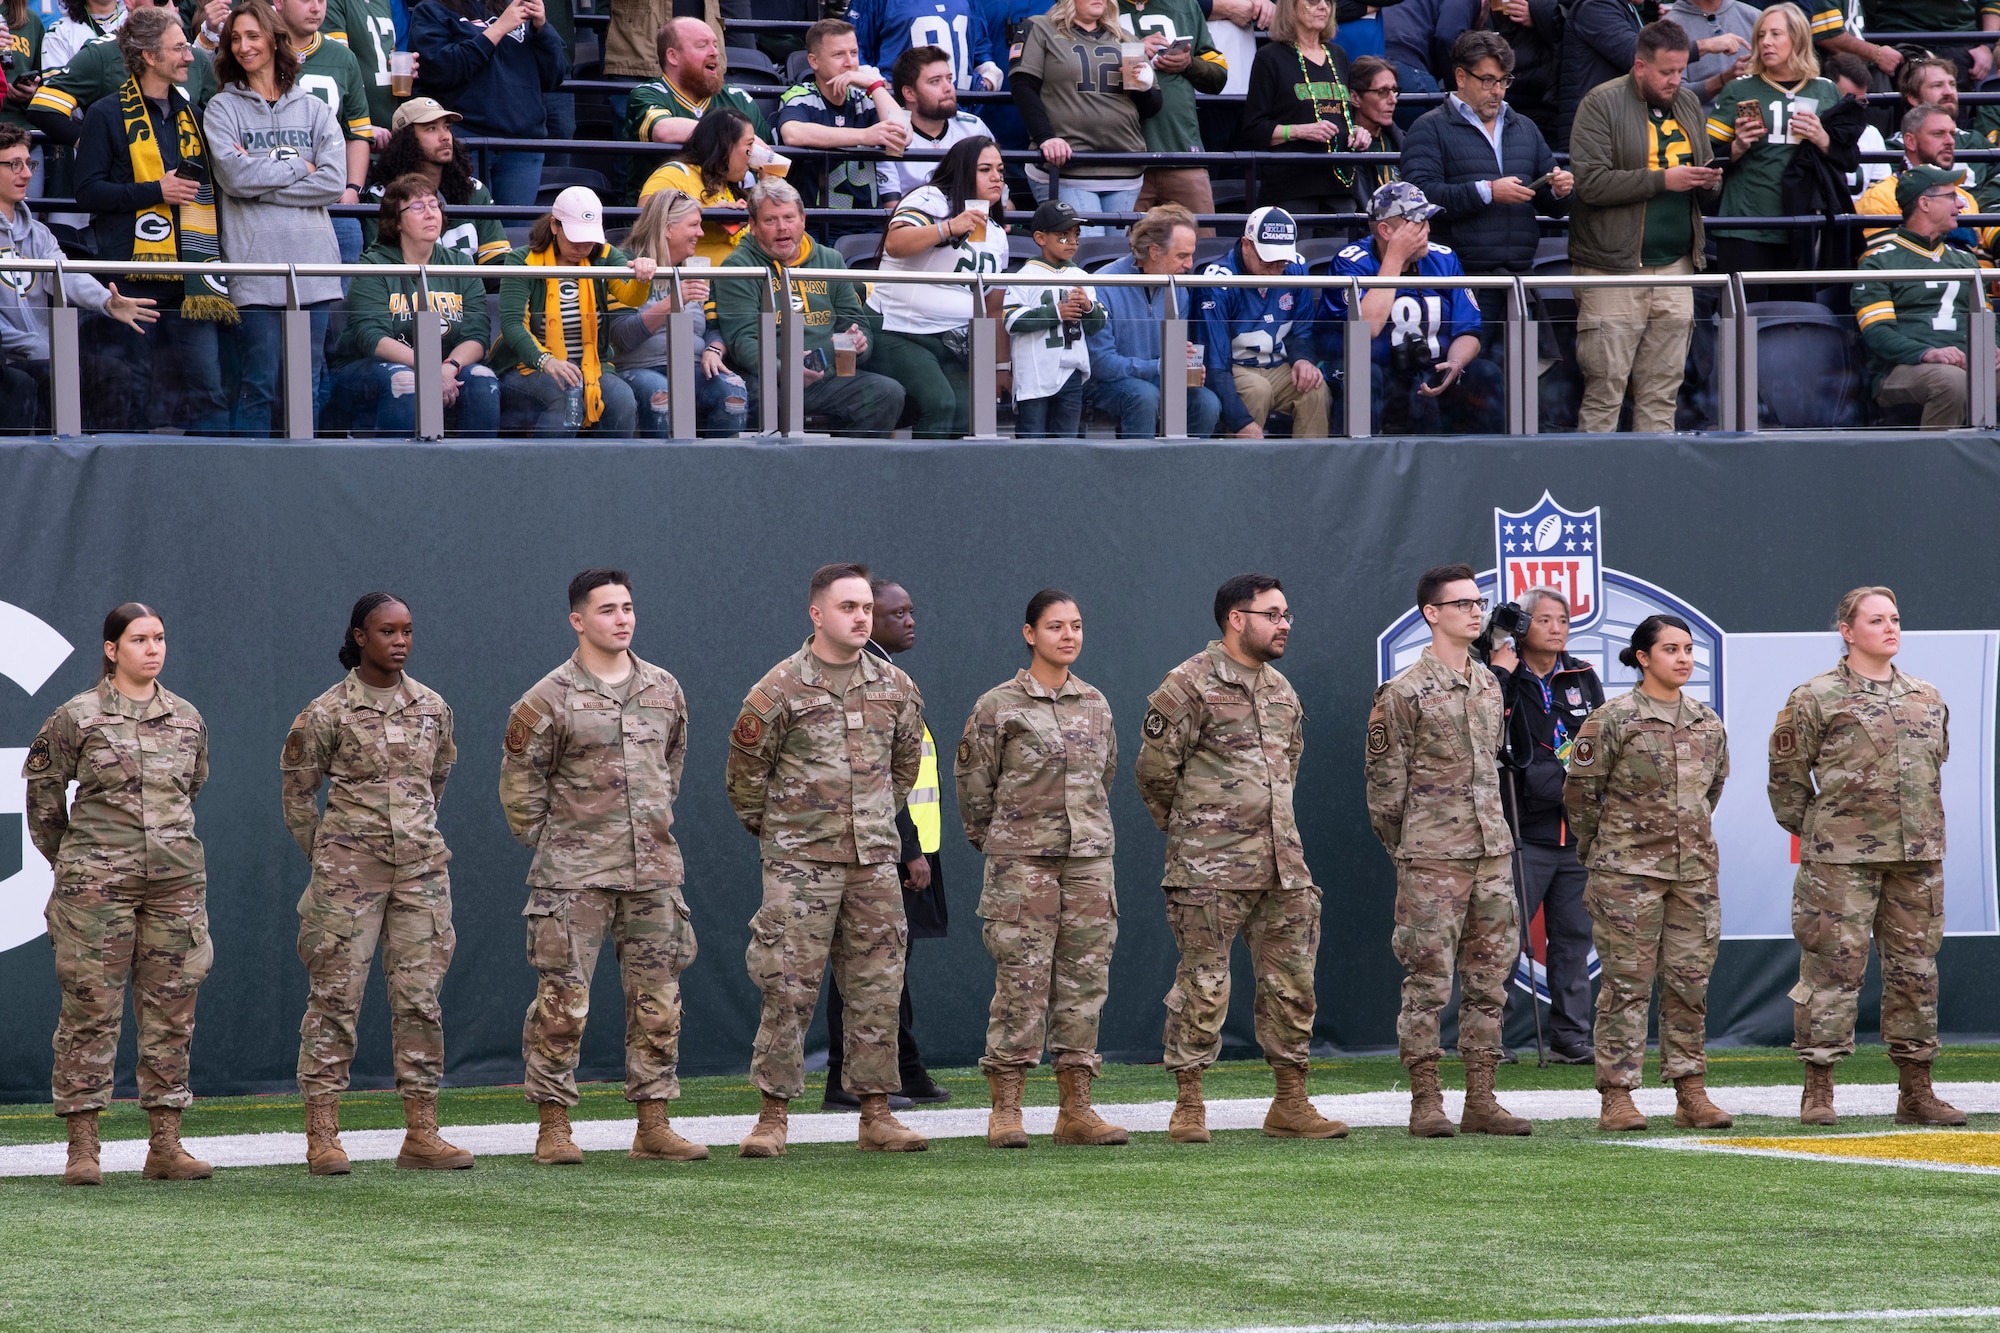 U.S. Airmen assigned to Royal Air Force Mildenhall and RAF Lakenheath standby to assist unfurling the U.S. Flag during the pre-game ceremony of the National Football League’s New York Giants vs. Green Bay Packers game at Tottenham Hotspur Stadium, in London, England, Oct. 9, 2022. The pre-game ceremony featured more than 50 Airmen unfurling the flag along with an honor guard team and vocalist to sing the U.S. National Anthem. (U.S. Air Force photo by Tech. Sgt. Anthony Hetlage)